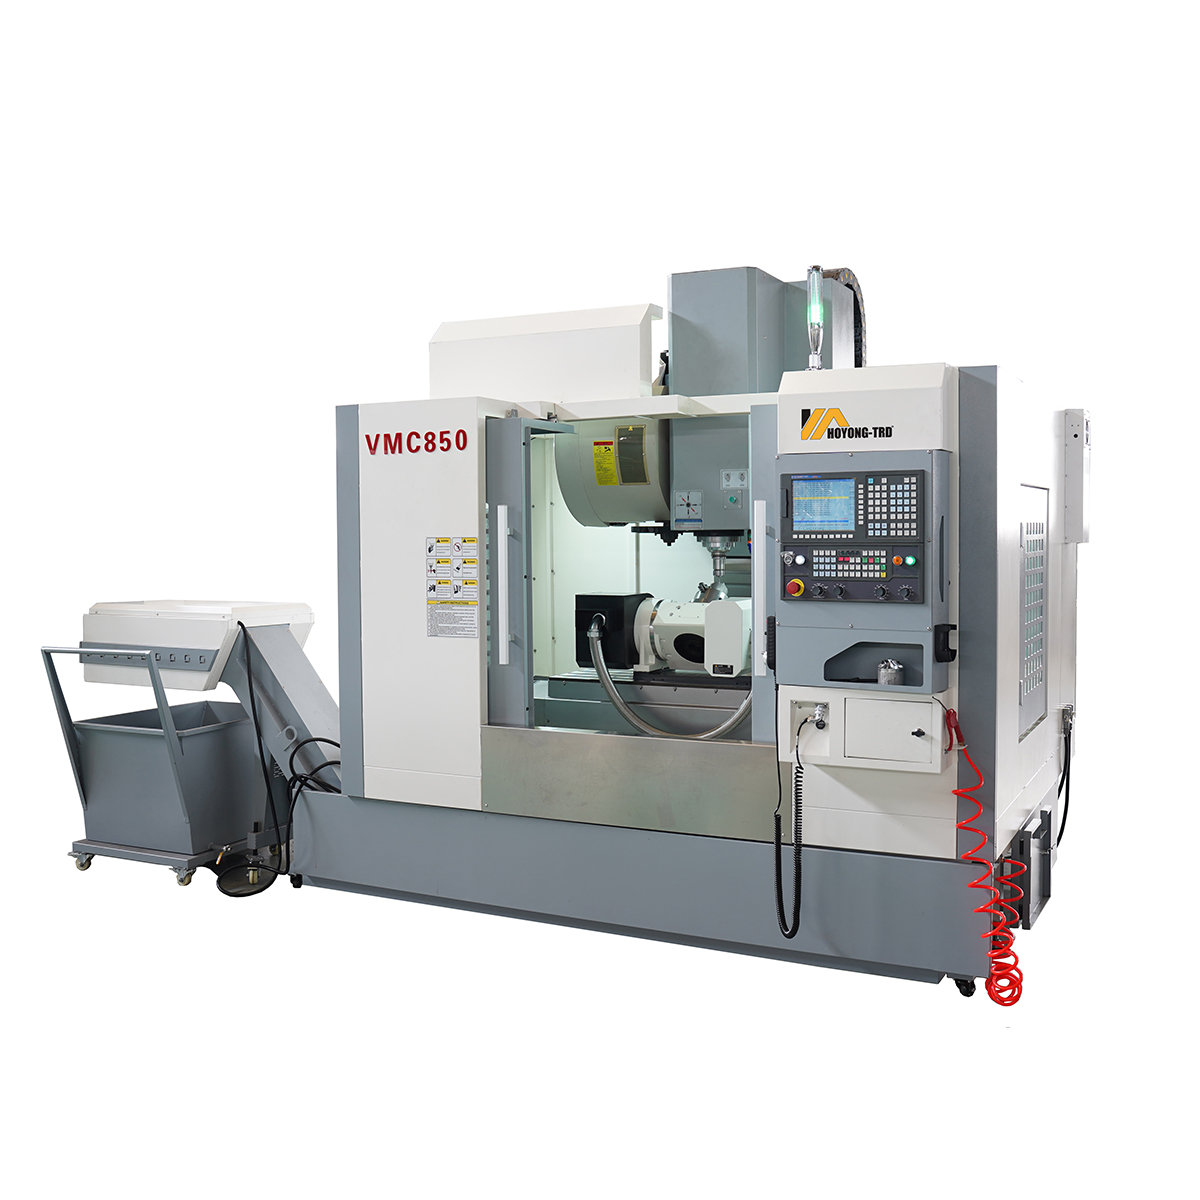 Advancing Precision: The VMC850 CNC Milling Machine with Fanuc Control System